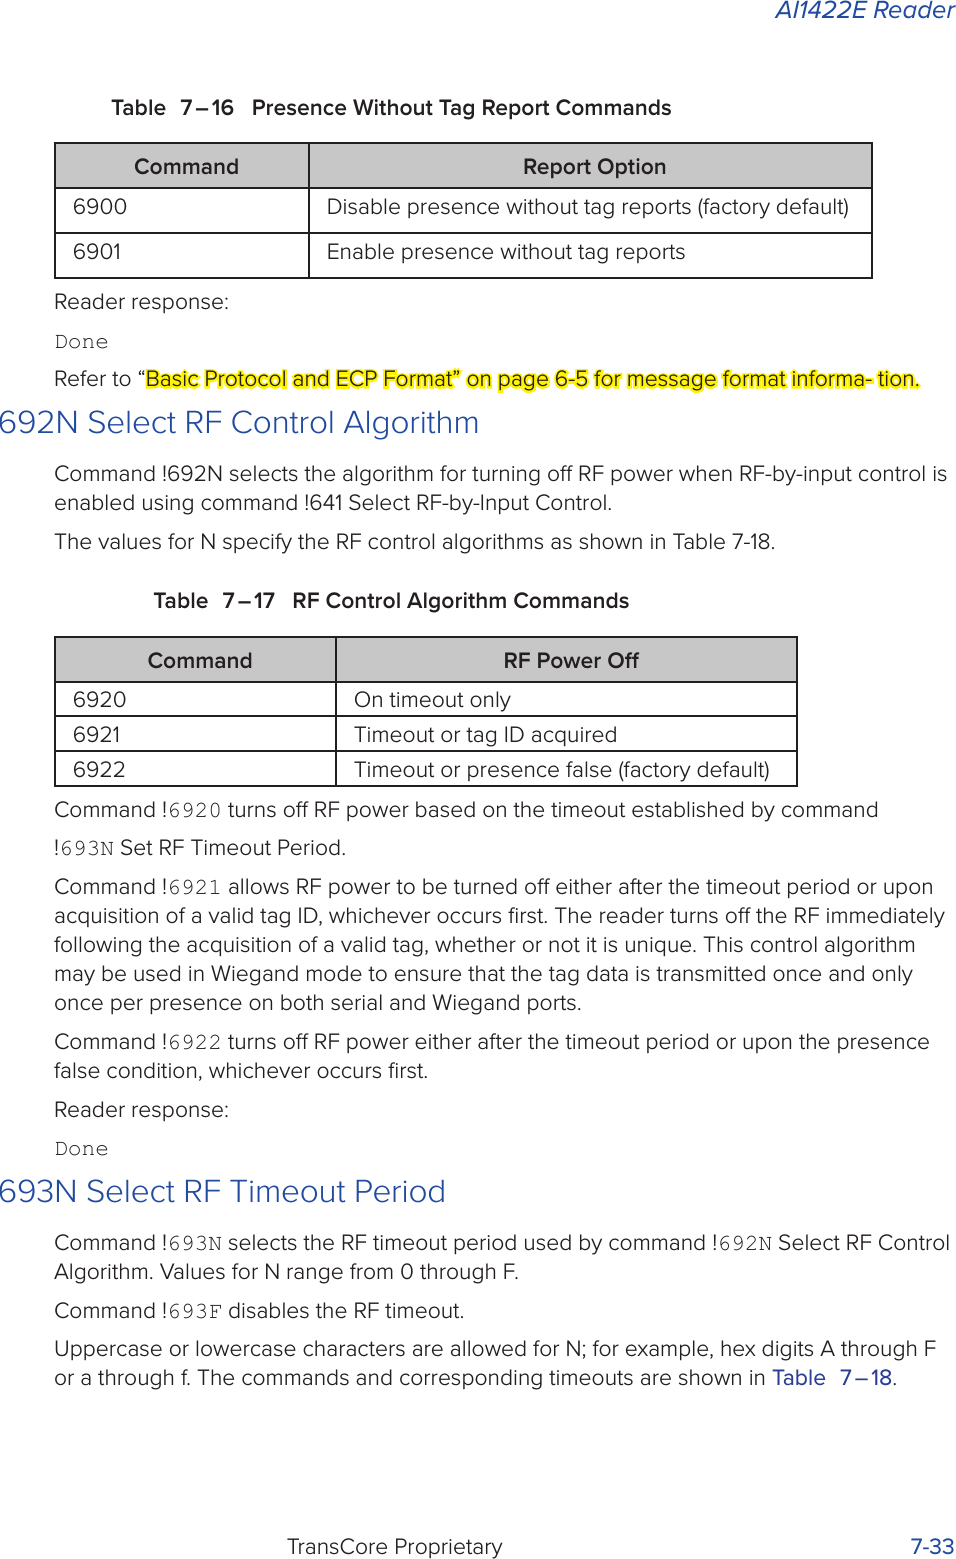 AI1422E ReaderTransCore Proprietary 7-33Table 7 – 16  Presence Without Tag Report CommandsCommand Report Option6900 Disable presence without tag reports (factory default)6901 Enable presence without tag reportsReader response:DoneRefer to “Basic Protocol and ECP Format” on page 6-5 for message format informa- tion.692N Select RF Control AlgorithmCommand !692N selects the algorithm for turning o RF power when RF-by-input control is enabled using command !641 Select RF-by-Input Control.The values for N specify the RF control algorithms as shown in Table 7-18.Table 7 – 17  RF Control Algorithm CommandsCommand RF Power O6920 On timeout only6921 Timeout or tag ID acquired6922 Timeout or presence false (factory default)Command !6920 turns o RF power based on the timeout established by command!693N Set RF Timeout Period.Command !6921 allows RF power to be turned o either after the timeout period or upon acquisition of a valid tag ID, whichever occurs ﬁrst. The reader turns o the RF immediately following the acquisition of a valid tag, whether or not it is unique. This control algorithm may be used in Wiegand mode to ensure that the tag data is transmitted once and only once per presence on both serial and Wiegand ports.Command !6922 turns o RF power either after the timeout period or upon the presence false condition, whichever occurs ﬁrst.Reader response:Done693N Select RF Timeout PeriodCommand !693N selects the RF timeout period used by command !692N Select RF Control Algorithm. Values for N range from 0 through F.Command !693F disables the RF timeout.Uppercase or lowercase characters are allowed for N; for example, hex digits A through F or a through f. The commands and corresponding timeouts are shown in Table 7 – 18.